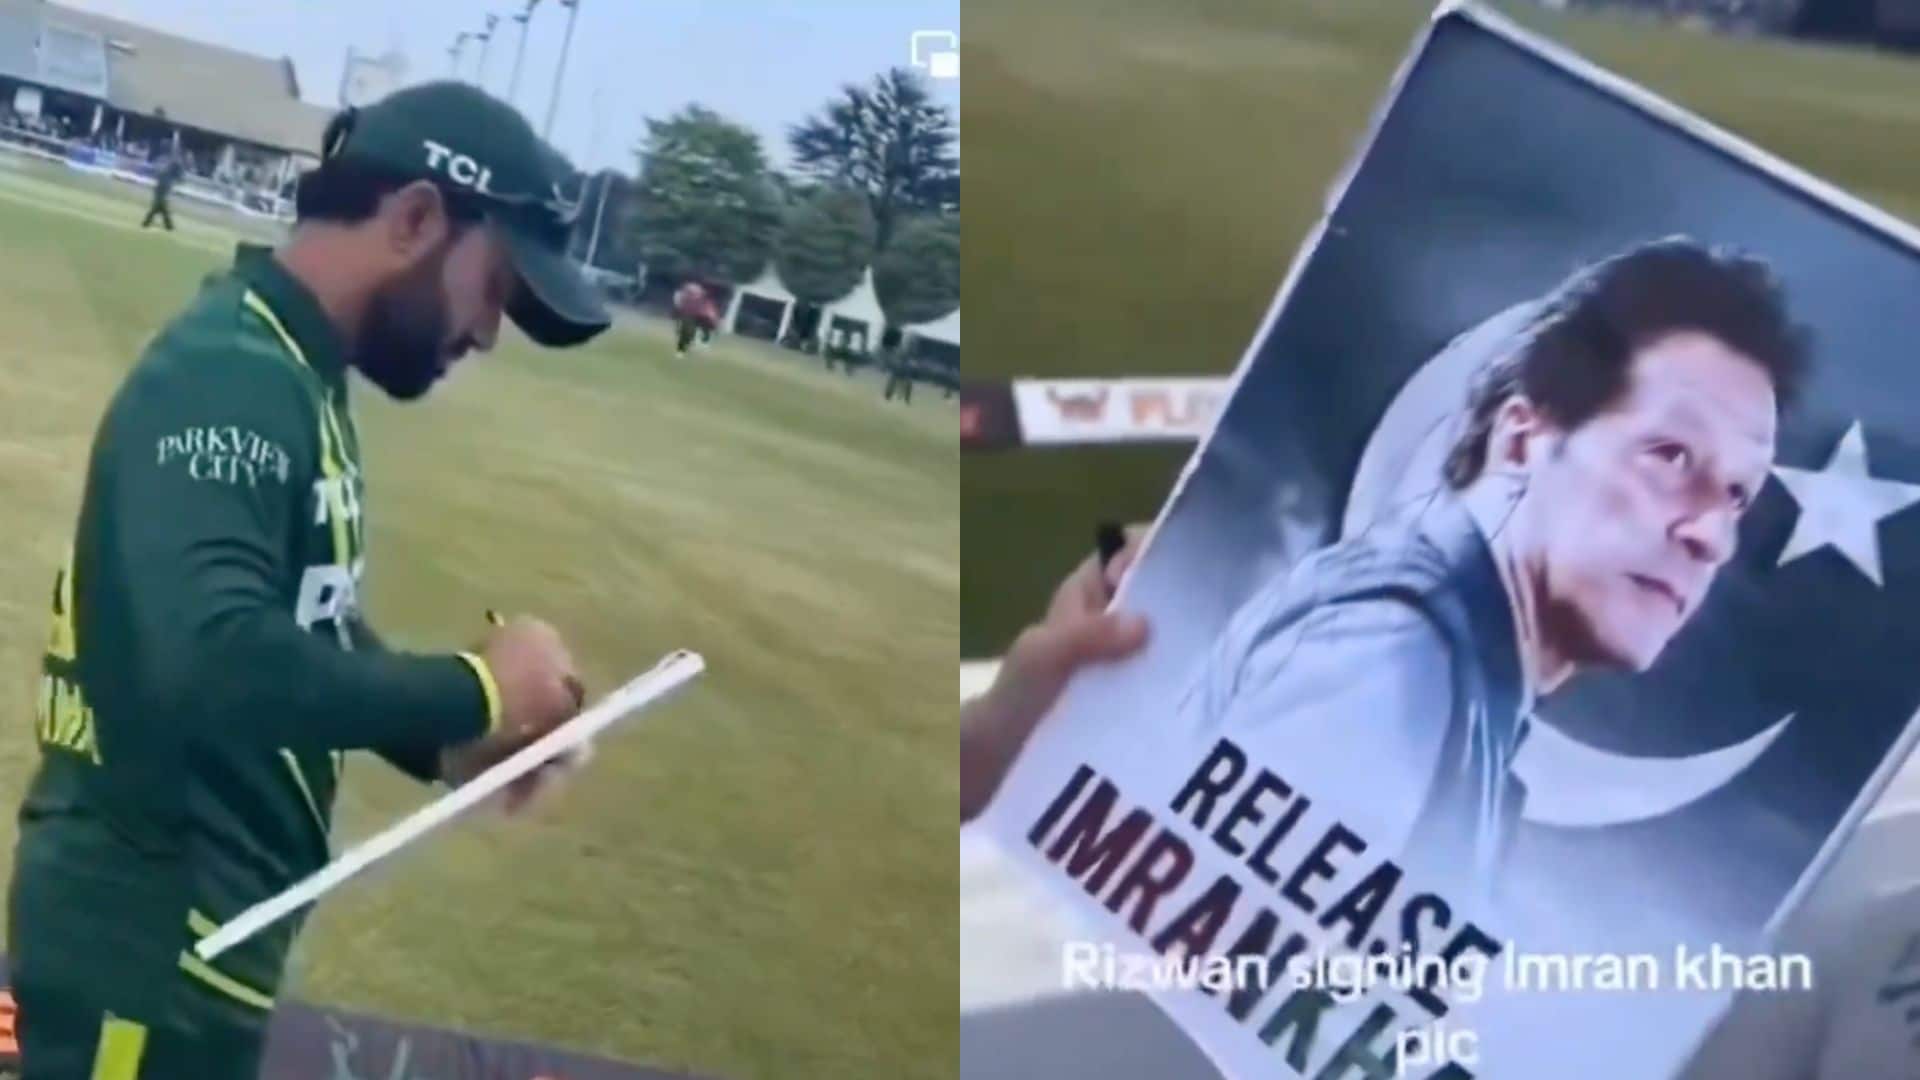 Mohammad Rizwan signing the poster [X.com]